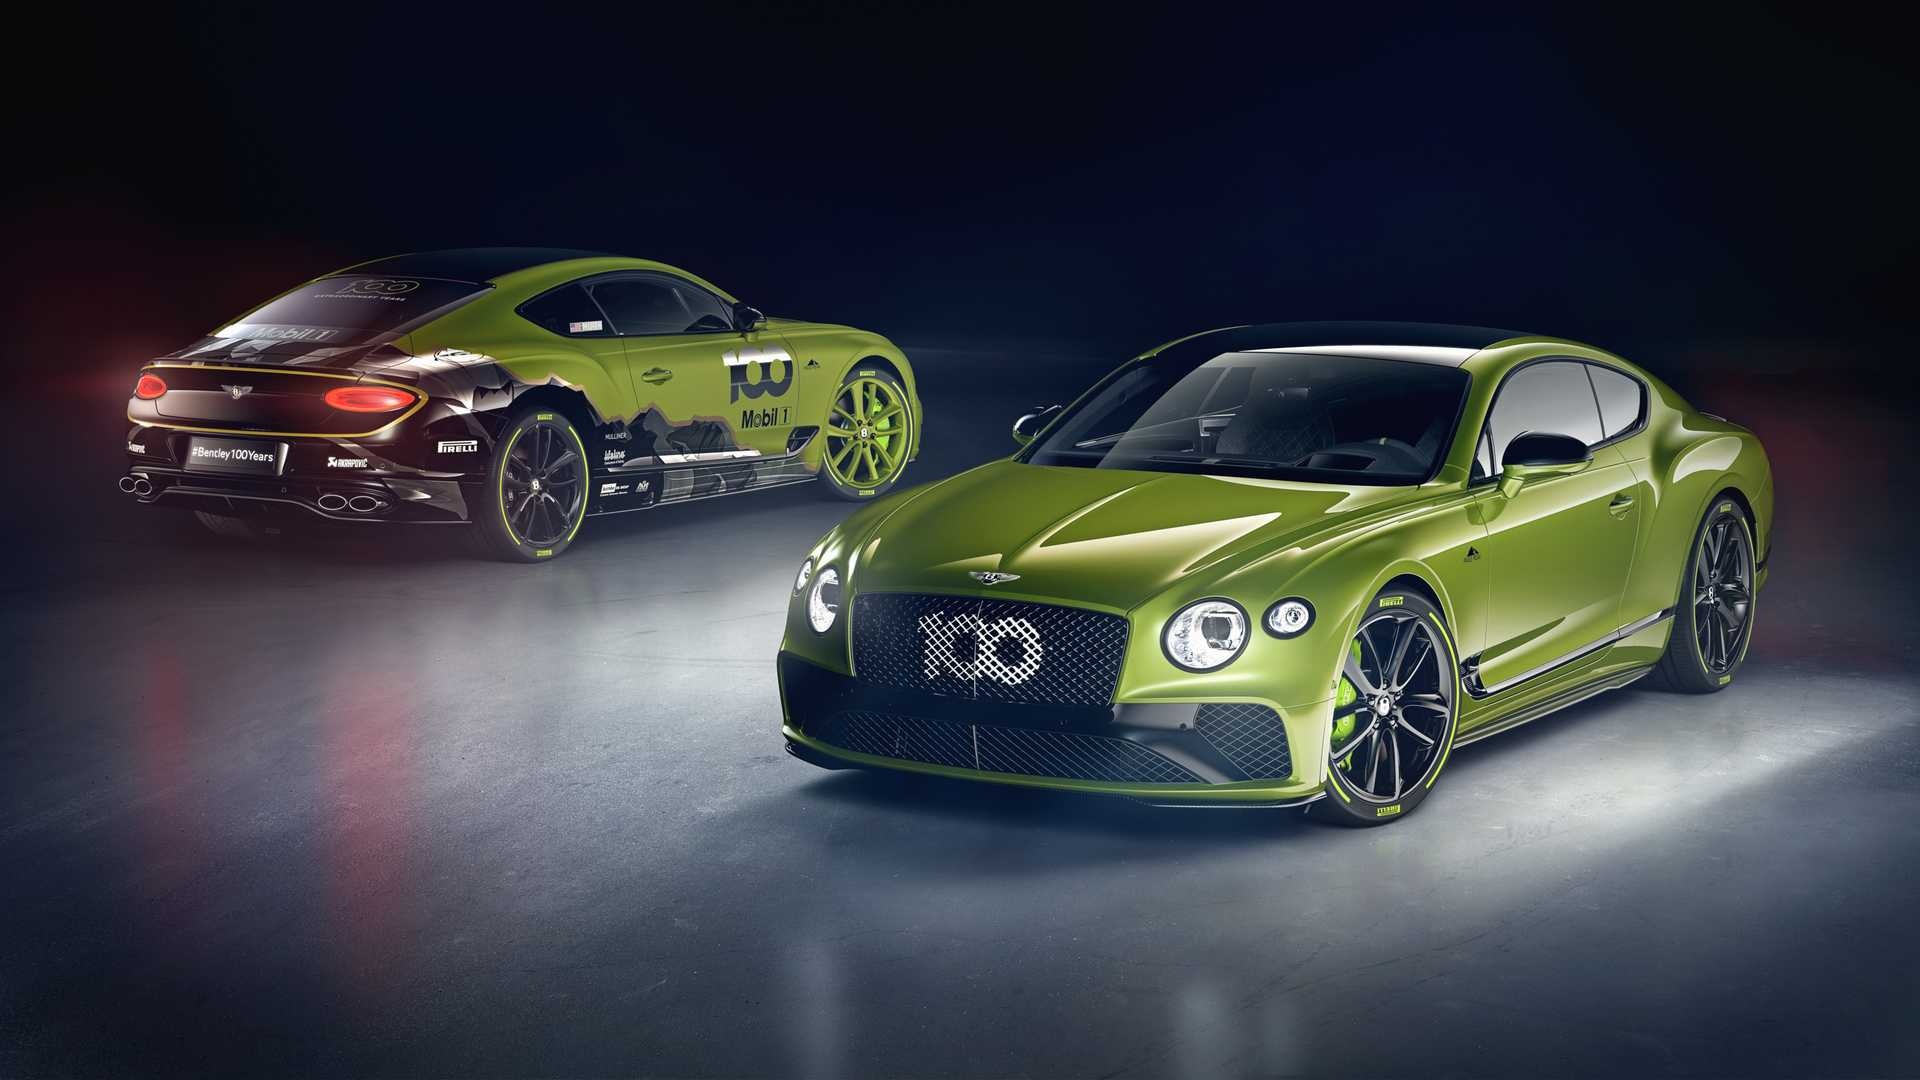 Bentley Continental GT, Limited edition model, Pikes Peak inspired, Exclusivity and performance, 1920x1080 Full HD Desktop